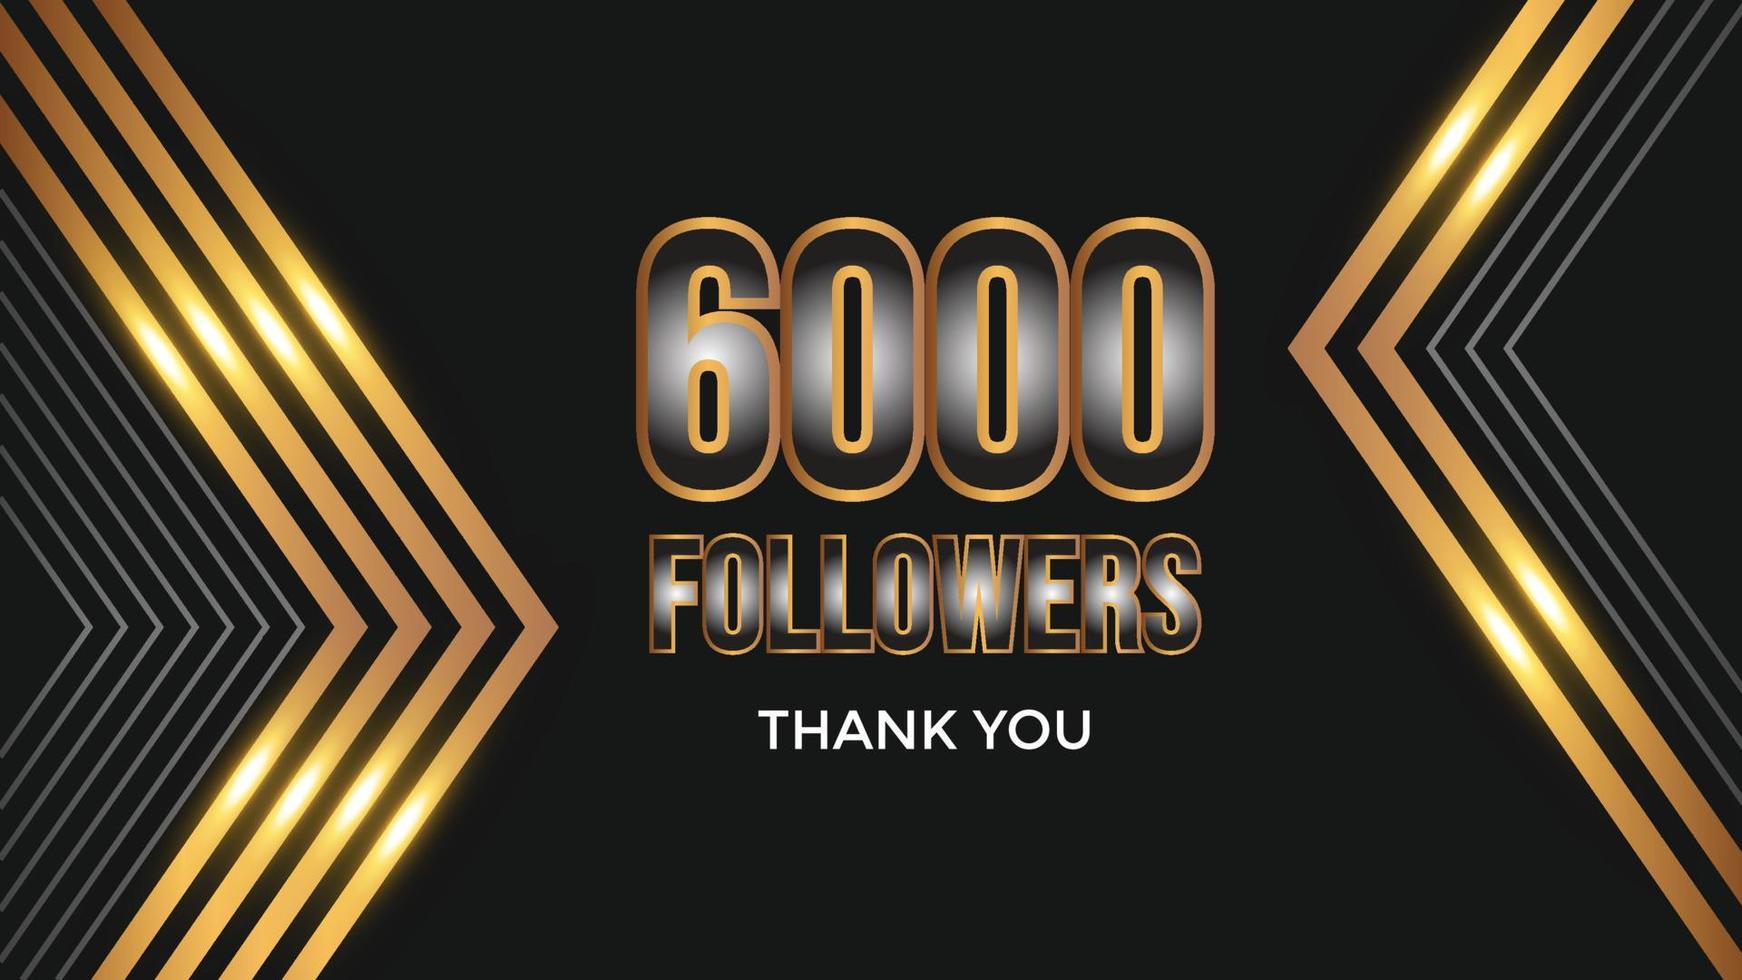 user Thank you celebrate of 6000 subscribers and followers. 6k followers thank you vector